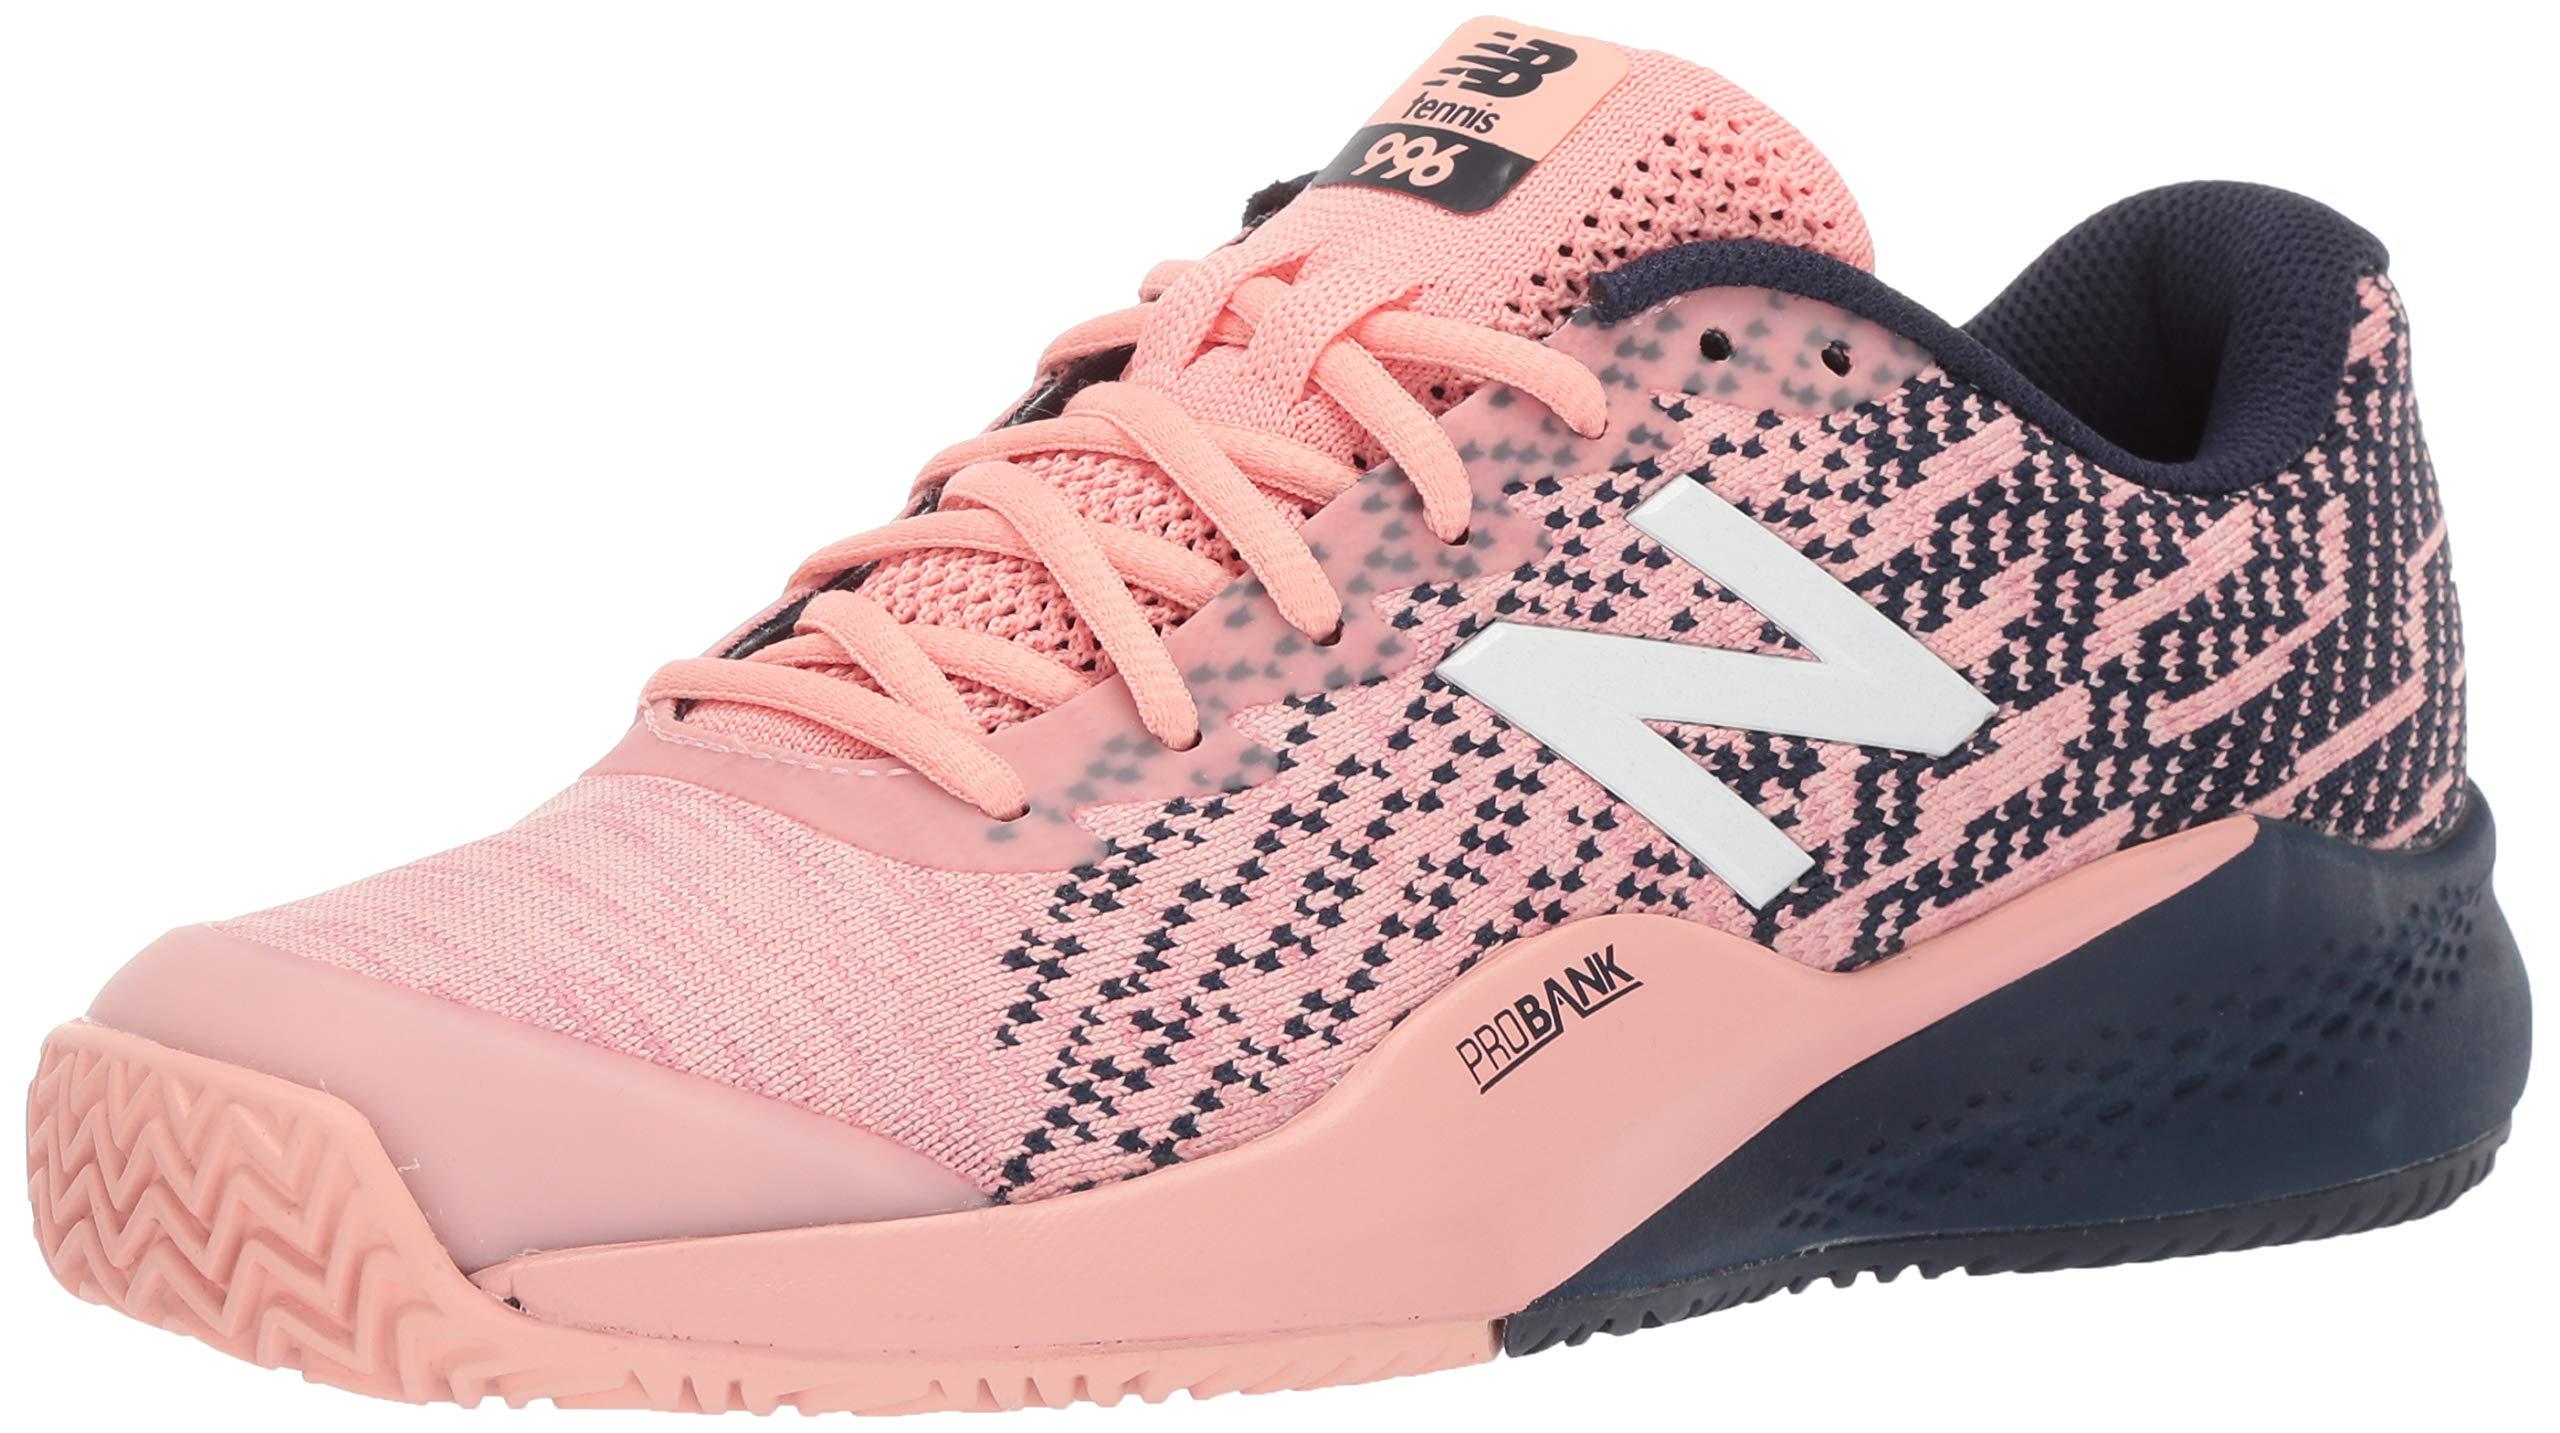 New Balance Synthetic 996 V3 Clay Tennis Shoe in Pink - Save 65% - Lyst